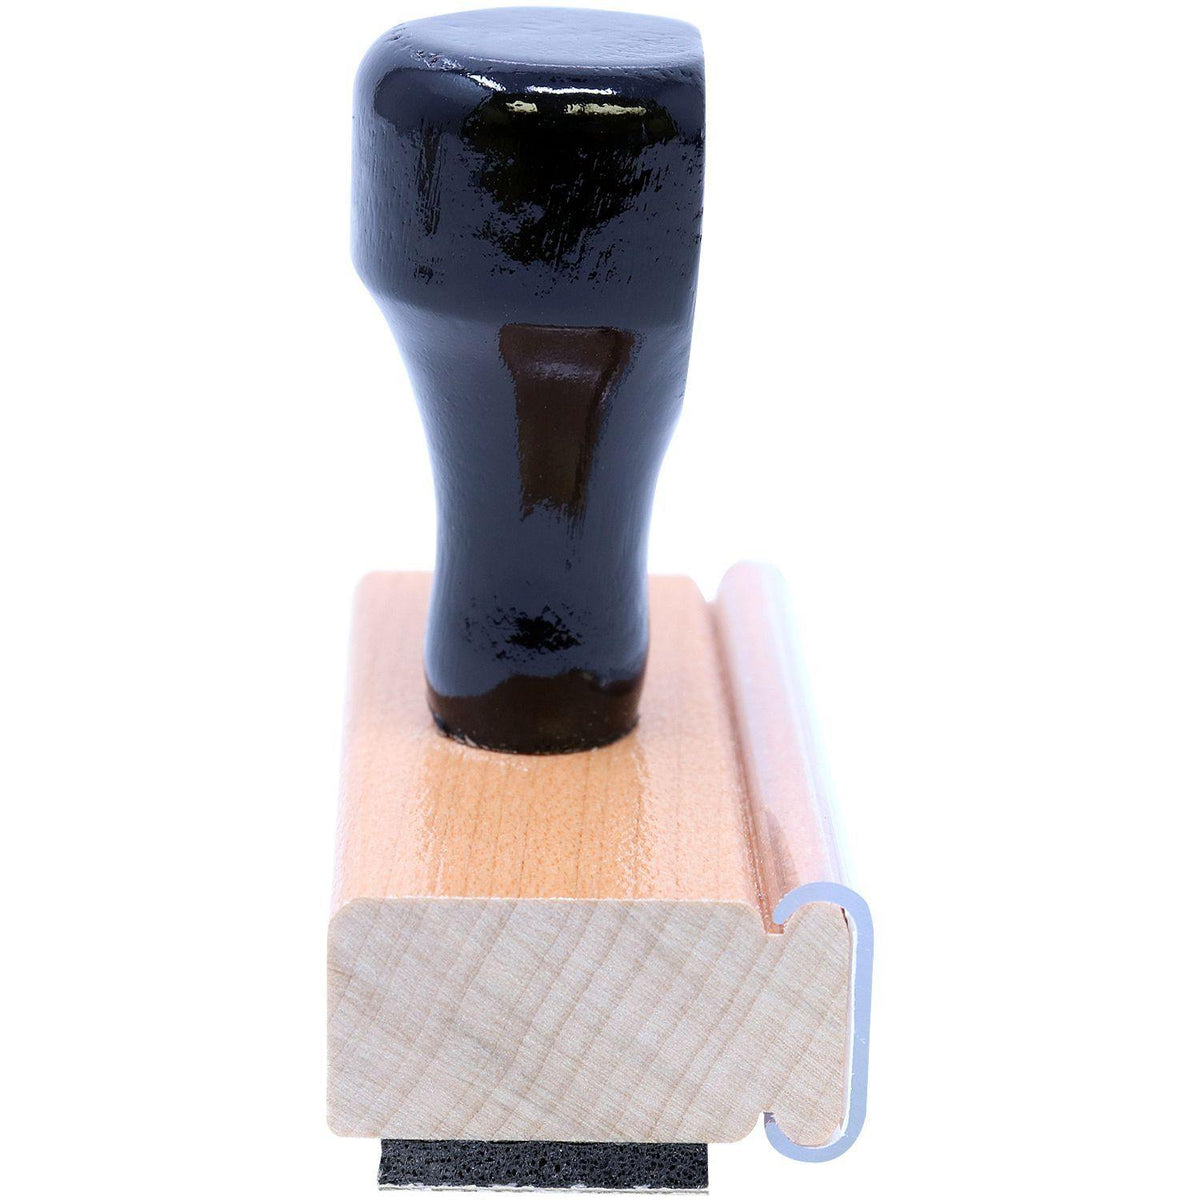 Post Dated Rubber Stamp - Engineer Seal Stamps - Brand_Acorn, Impression Size_Small, Stamp Type_Regular Stamp, Type of Use_Office